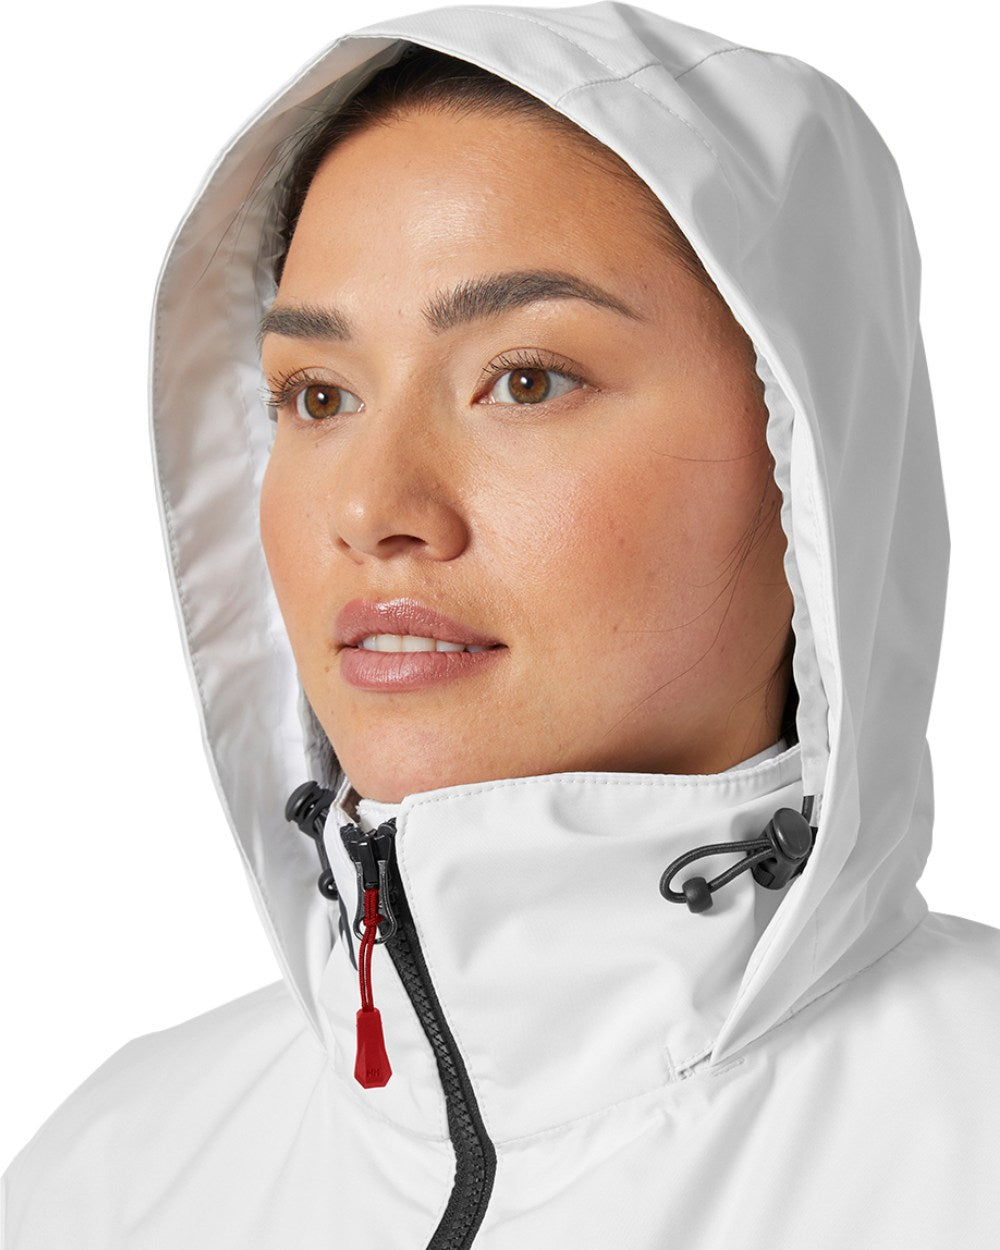 White Coloured Helly Hansen Womens Crew Hooded Midlayer Sailing Jacket 2.0 On A White Background 